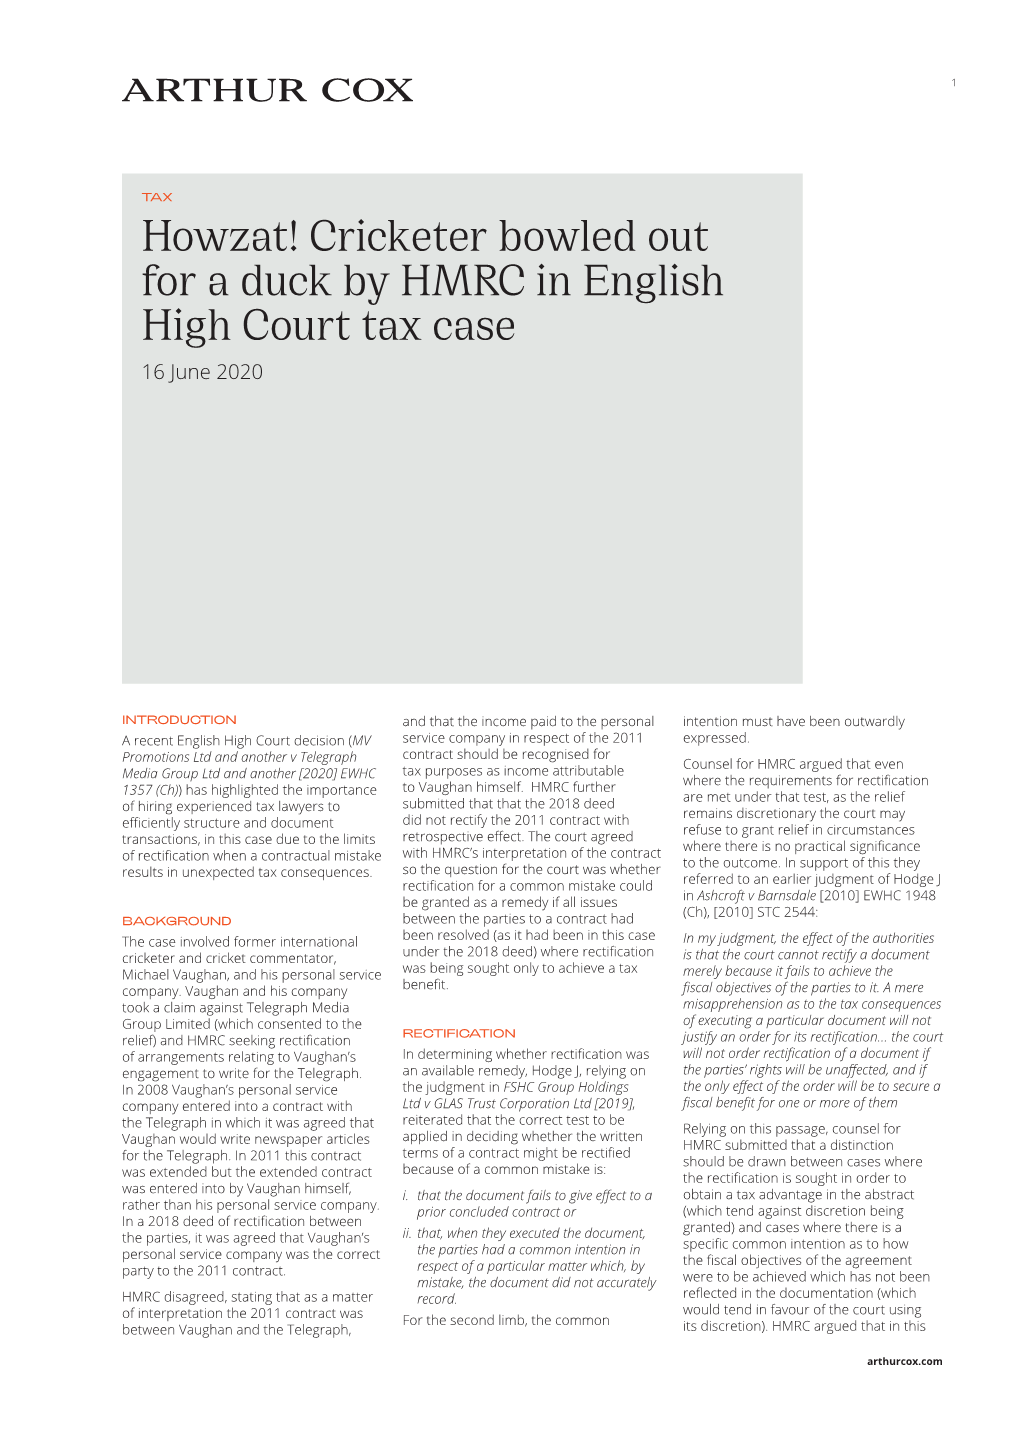 Howzat! Cricketer Bowled out for a Duck by HMRC in English High Court Tax Case 16 June 2020